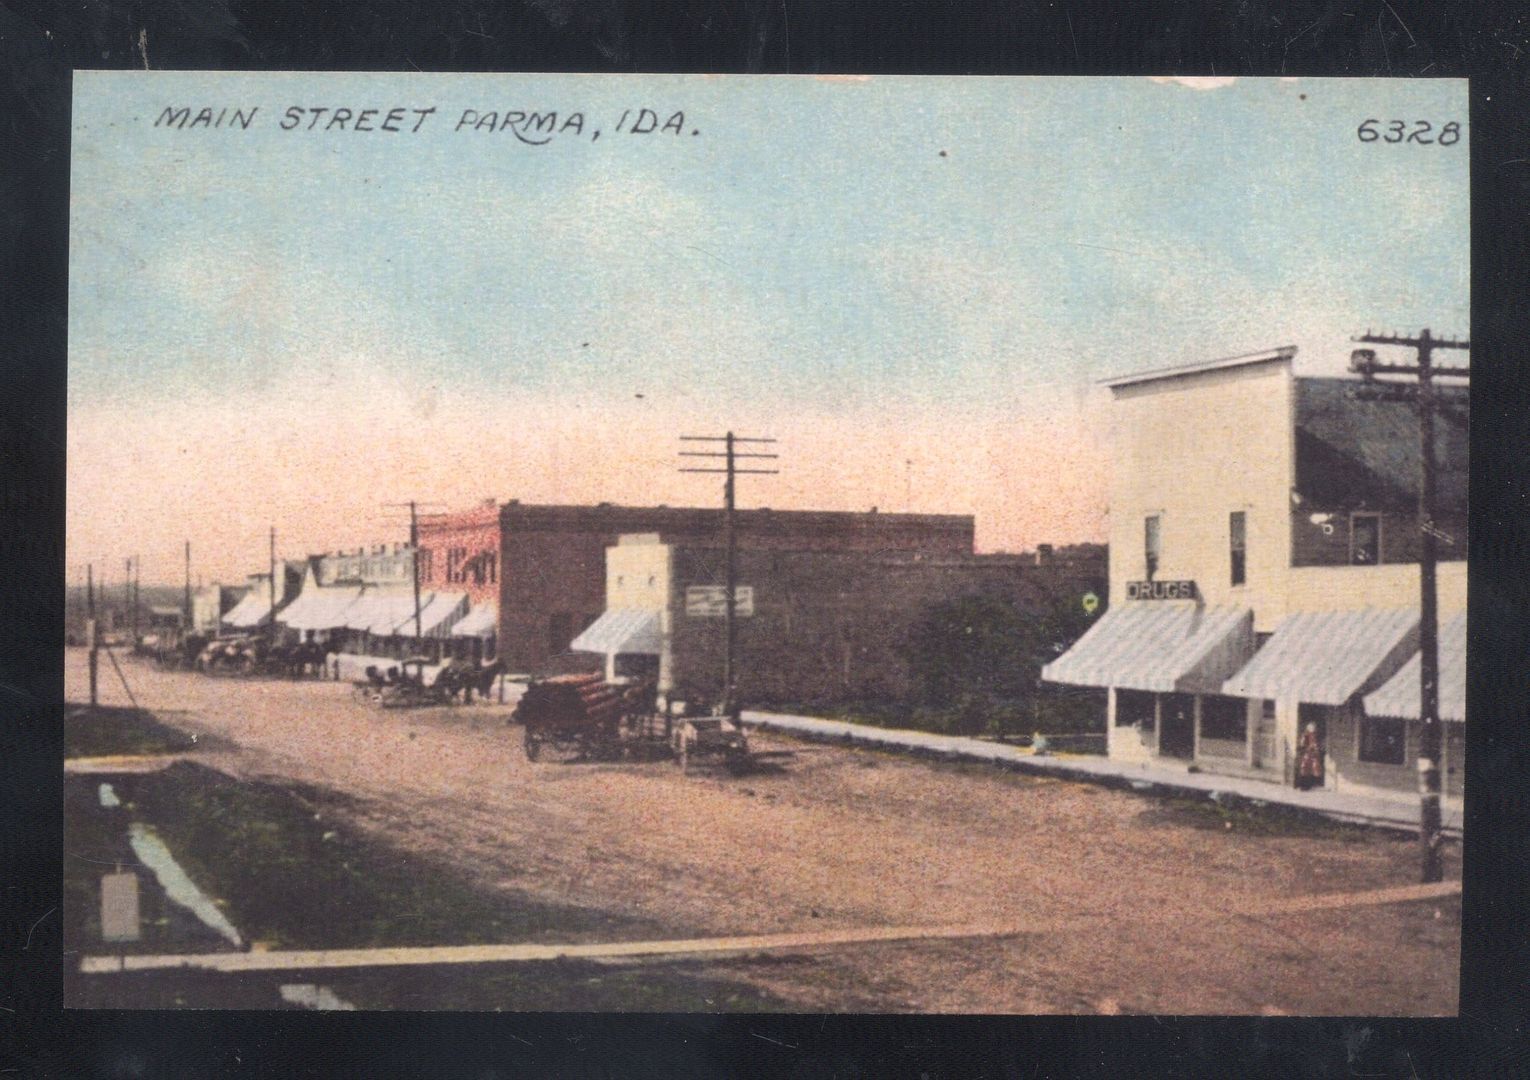 PARMA IDAHO DOWNTOWN DIRT STREET SCENE STORES HORSE & BUGGY POSTCARD COPY